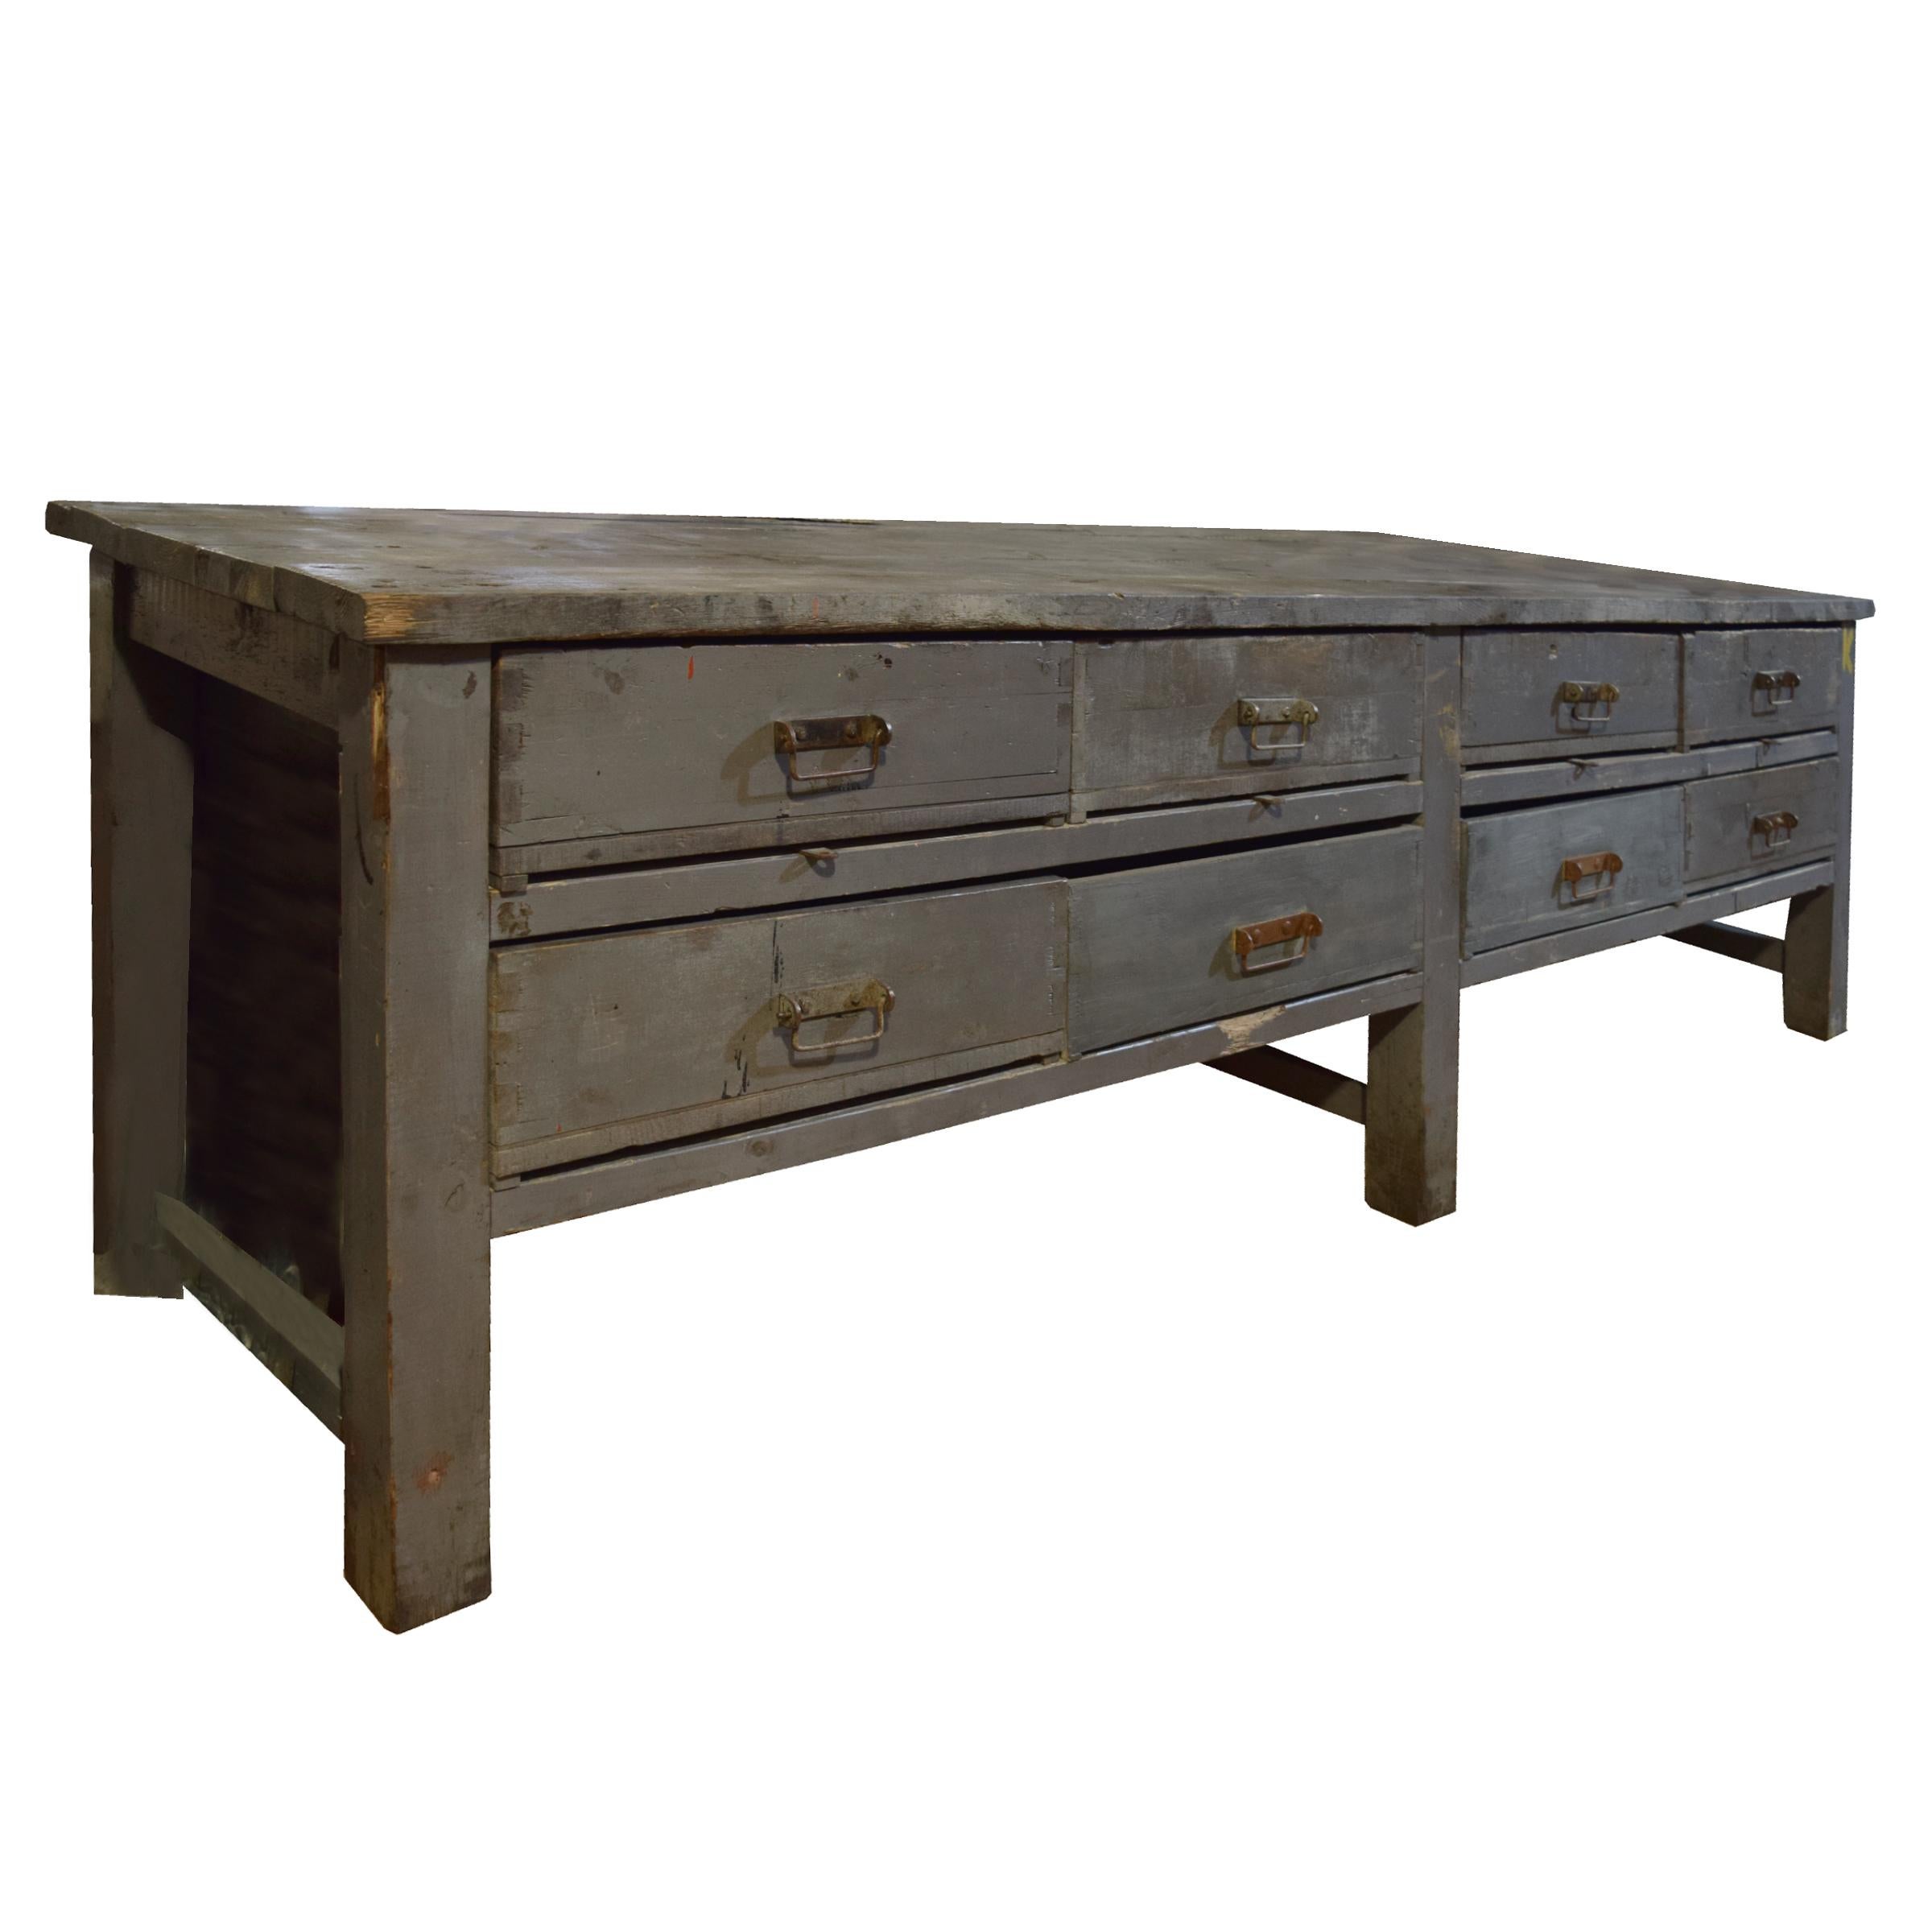 A fantastic Italian eight-drawer wood console with a great patina from the Moto Guzzi factory.